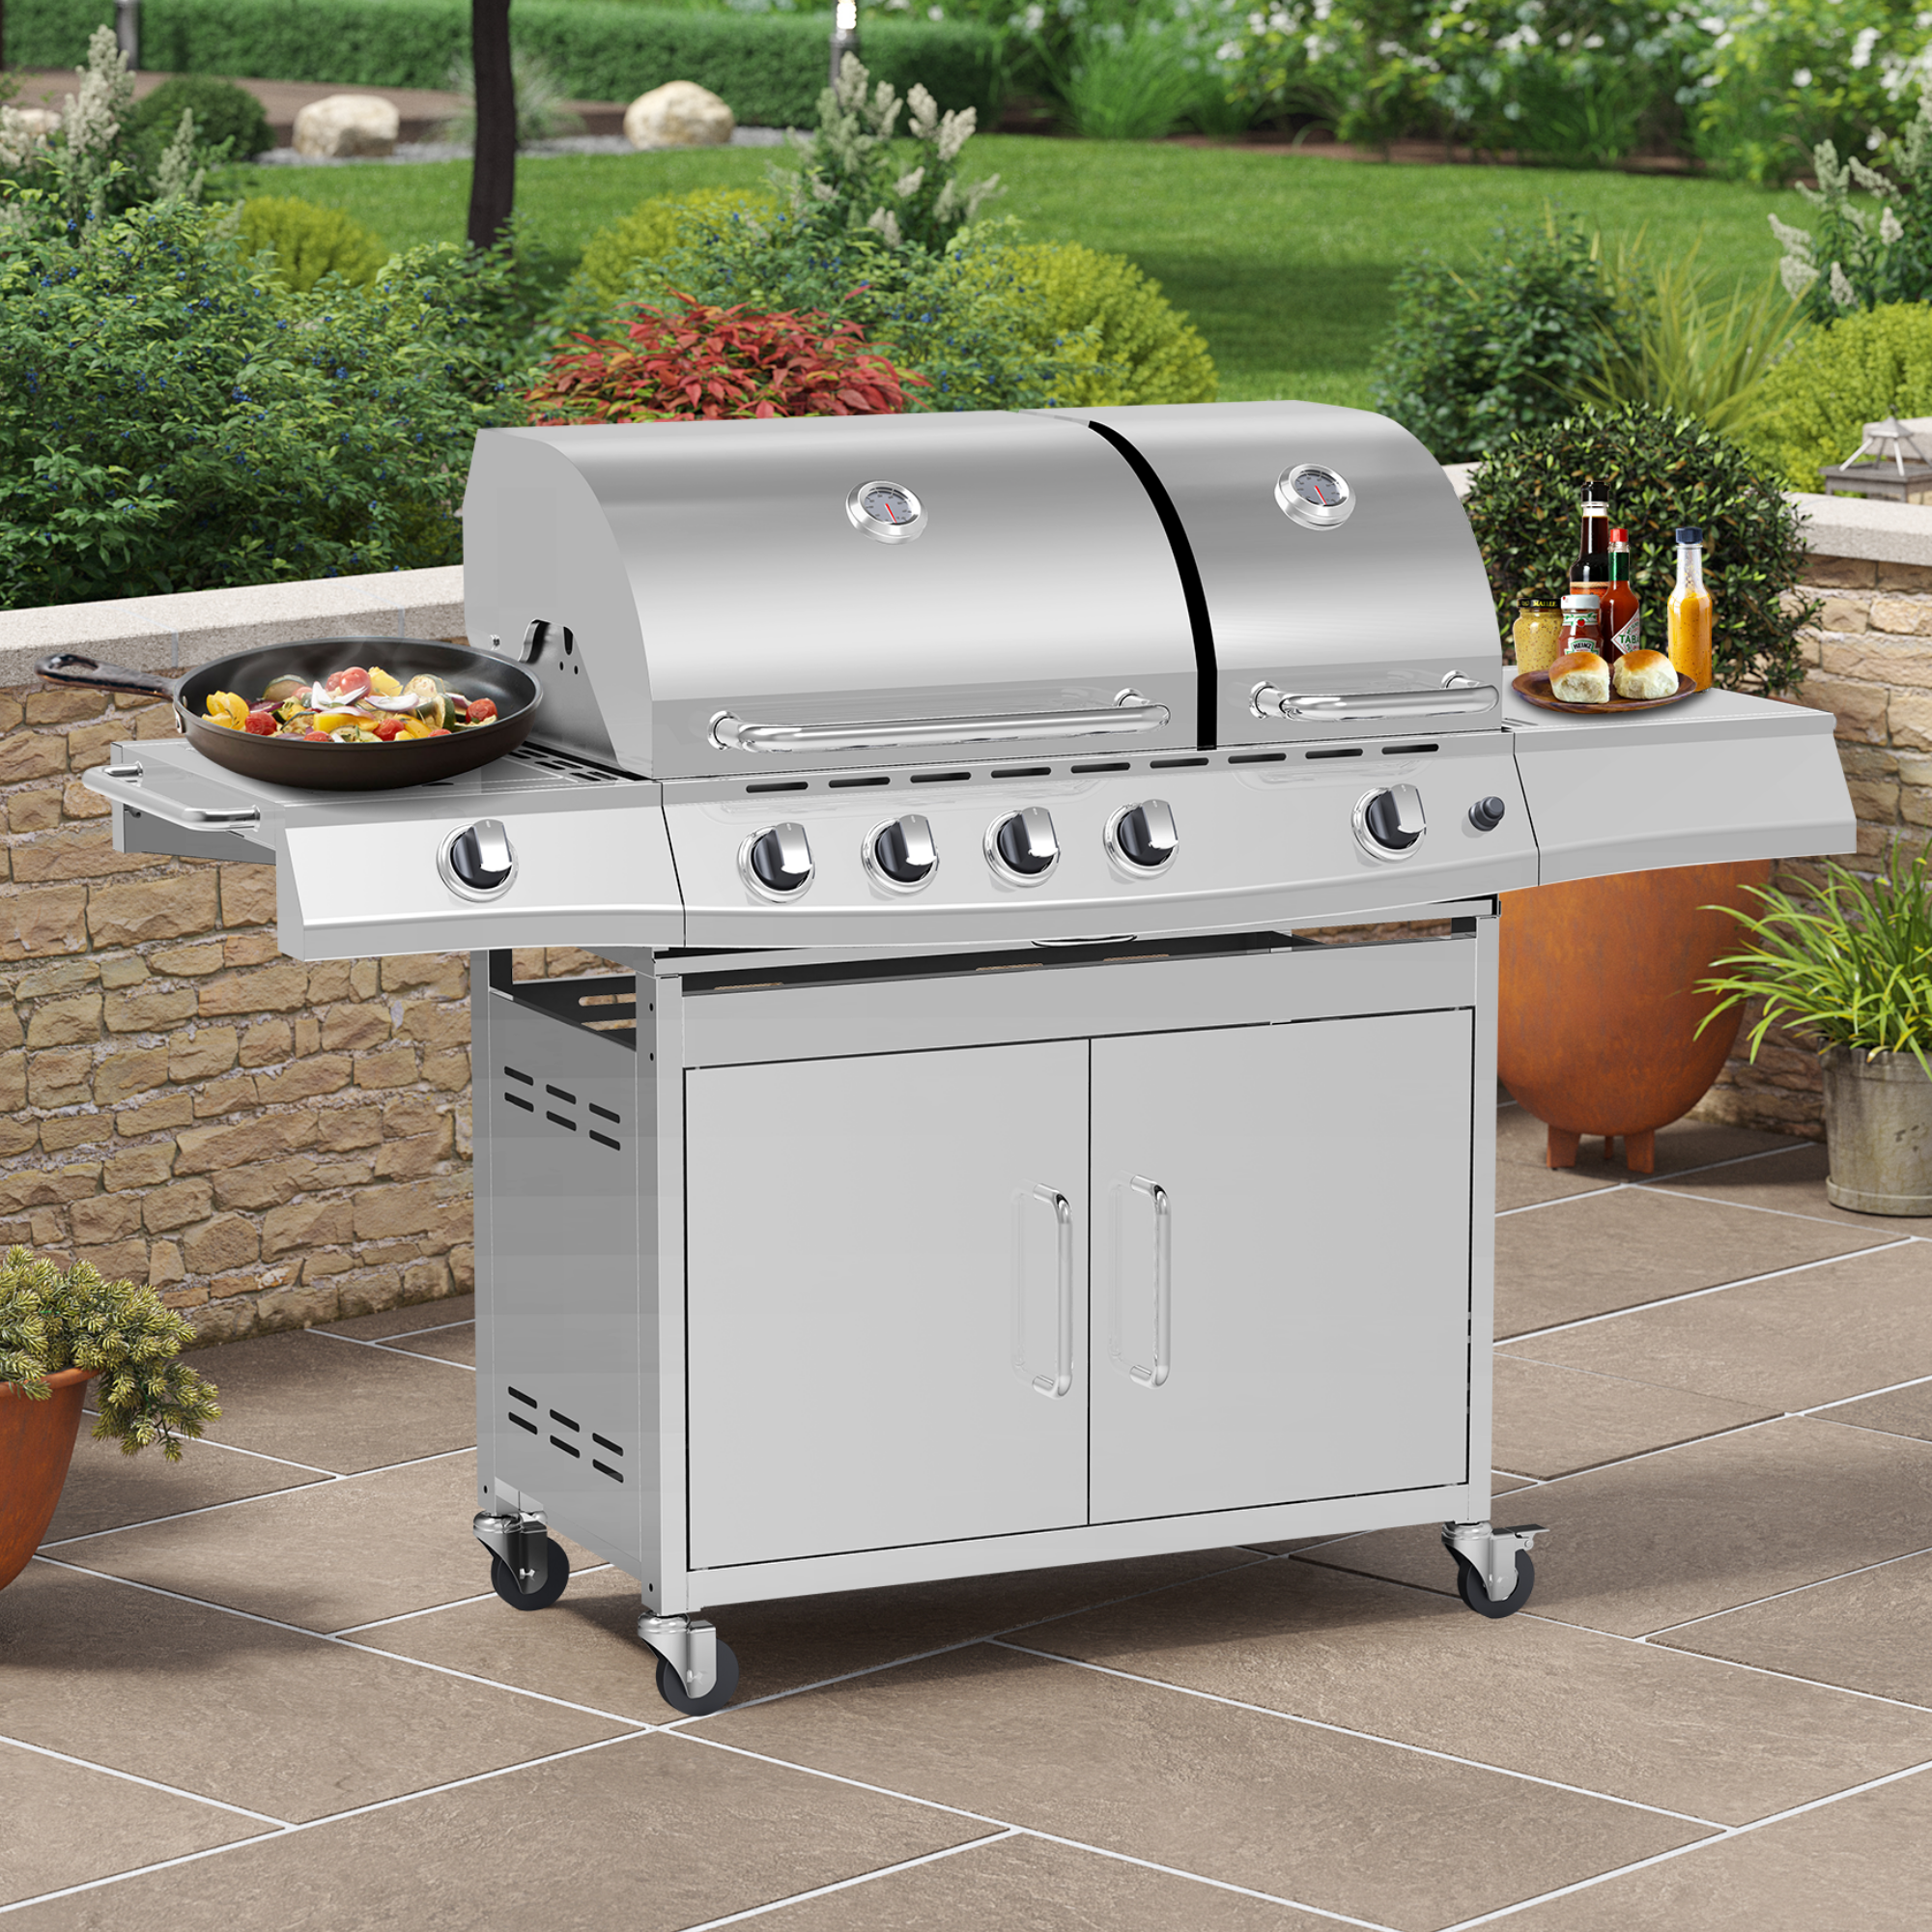 BillyOh Dallas Silver 5 Burner Gas BBQ Grill with Side Burner & Side Table Includes Cover & Regulator - Premium Double BBQ - Silver